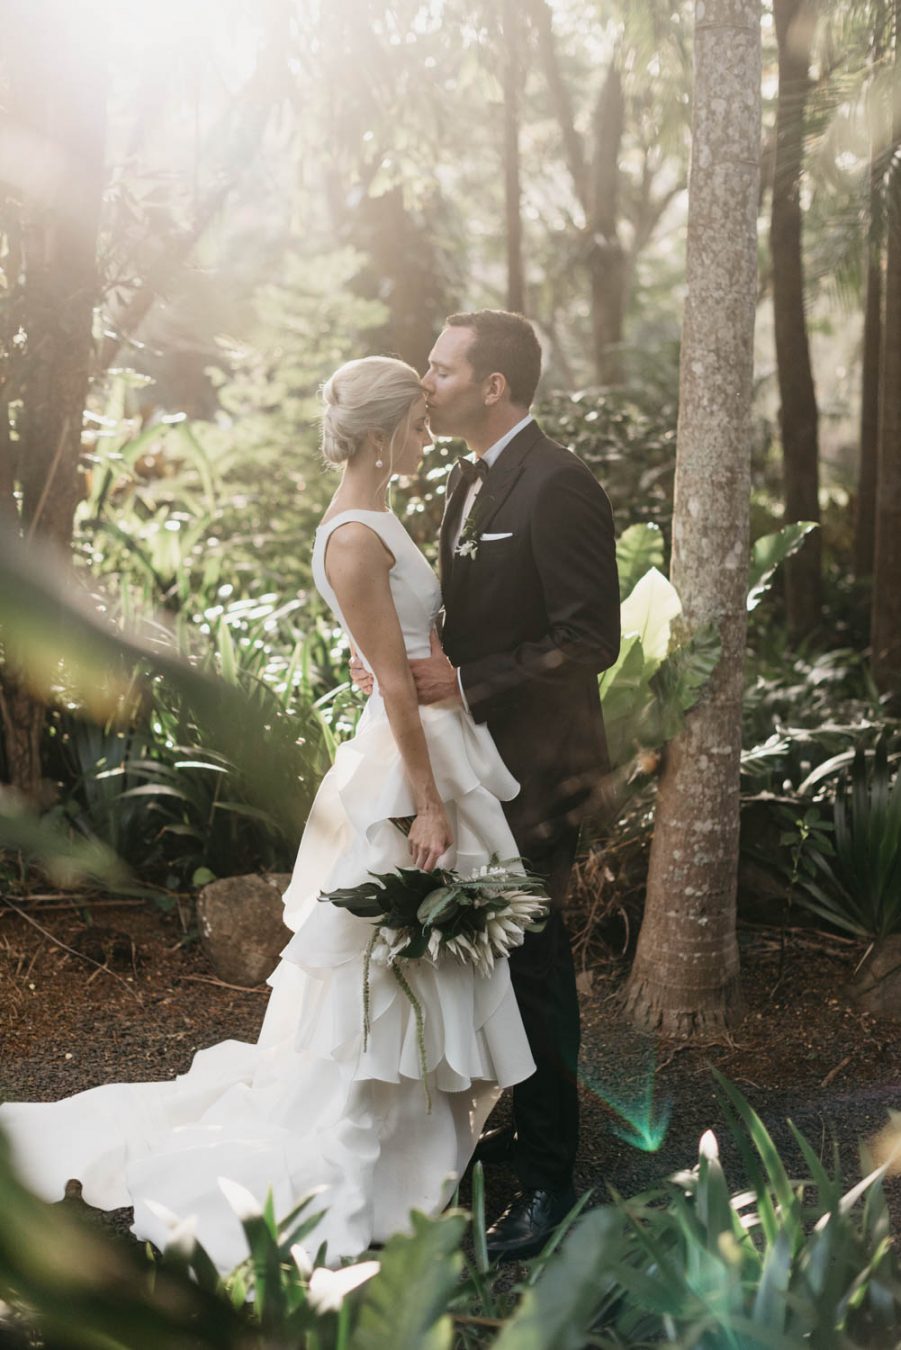 Bride and groom / Elopement photography